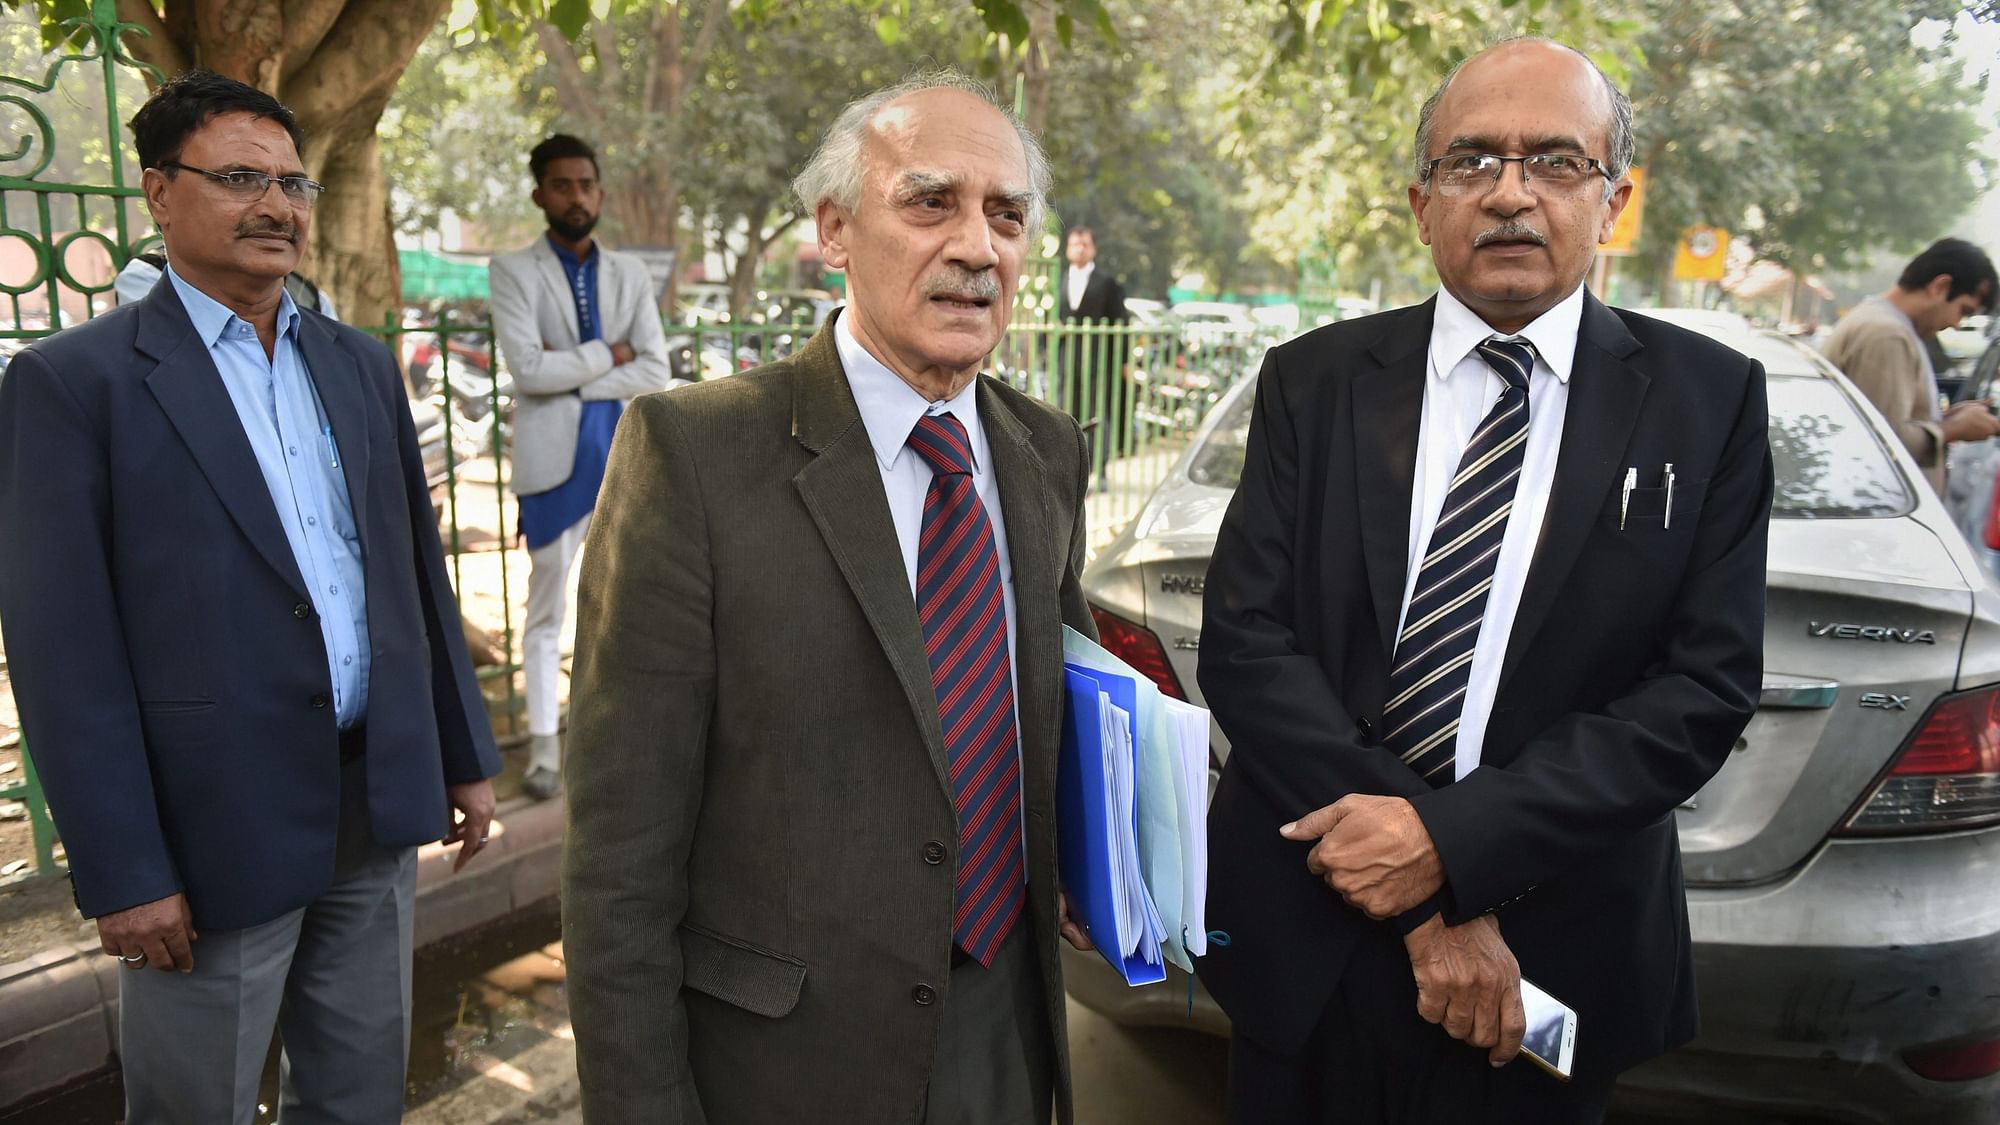 Senior lawyer Prashant Bhushan with former Union minister Arun Shourie at the Supreme Court during a hearing on the Rafale deal on Wednesday.